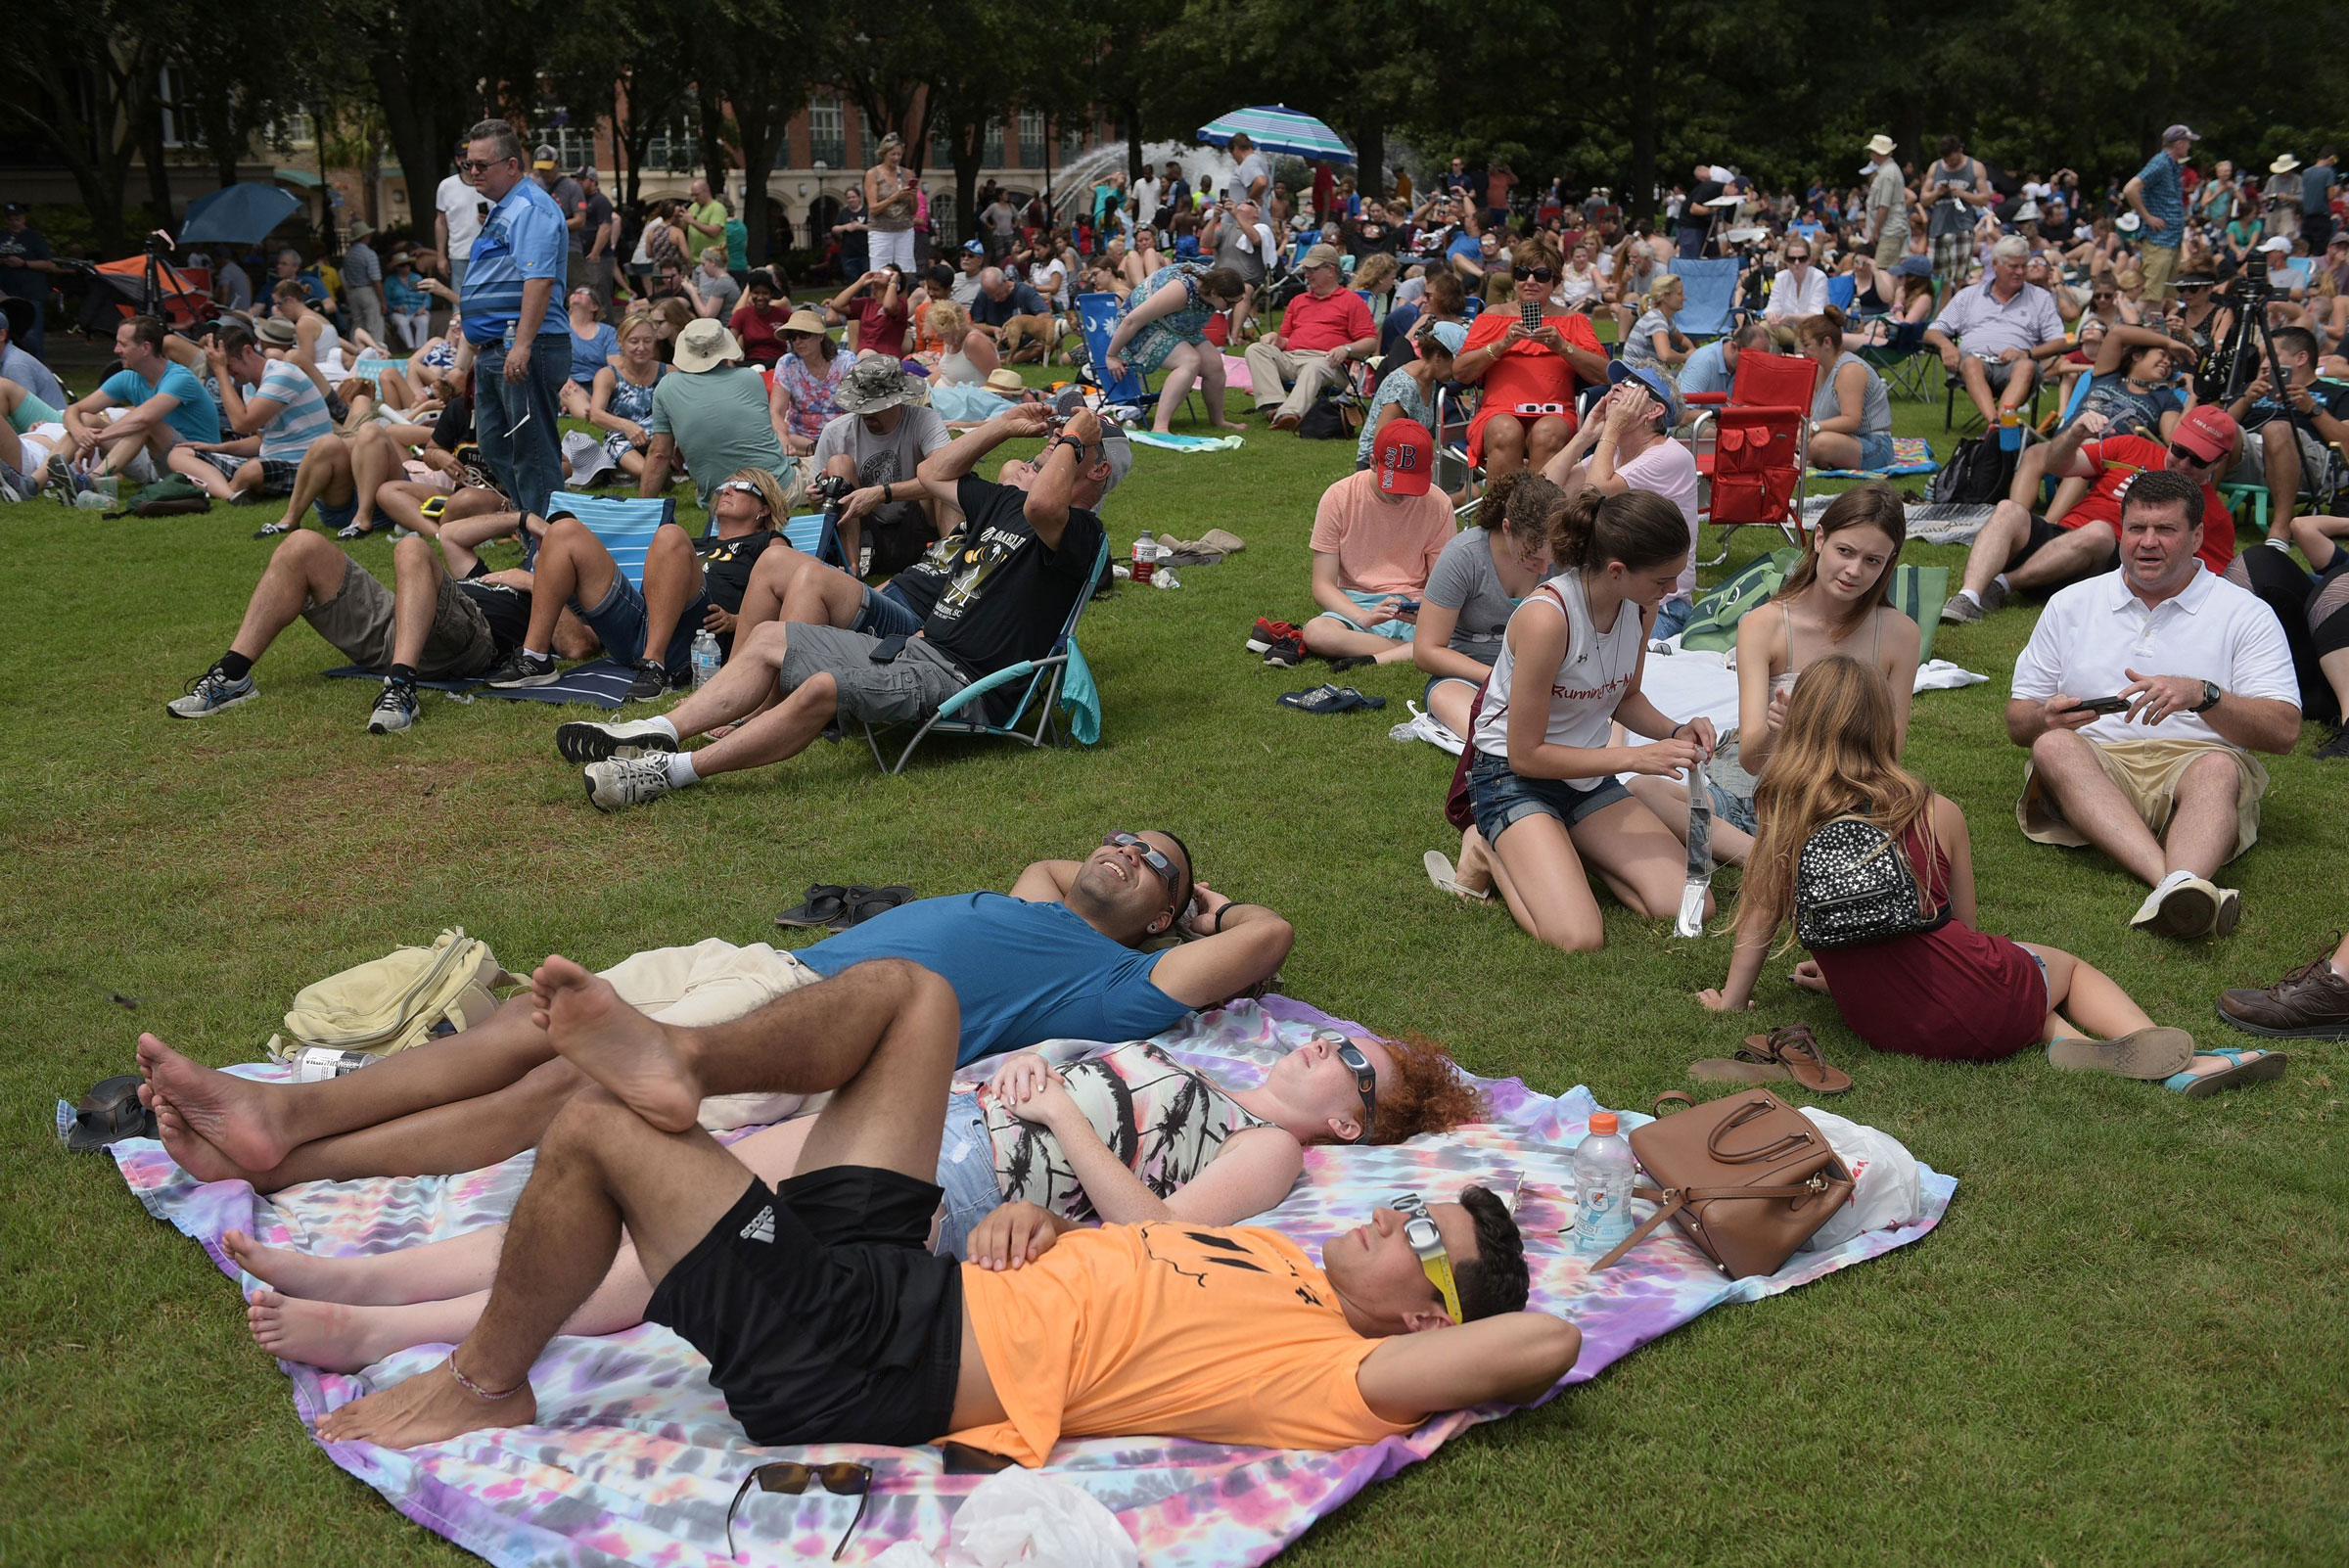 People watch the total solar eclipse in Charleston, South Carolina, on August 21, 2017.